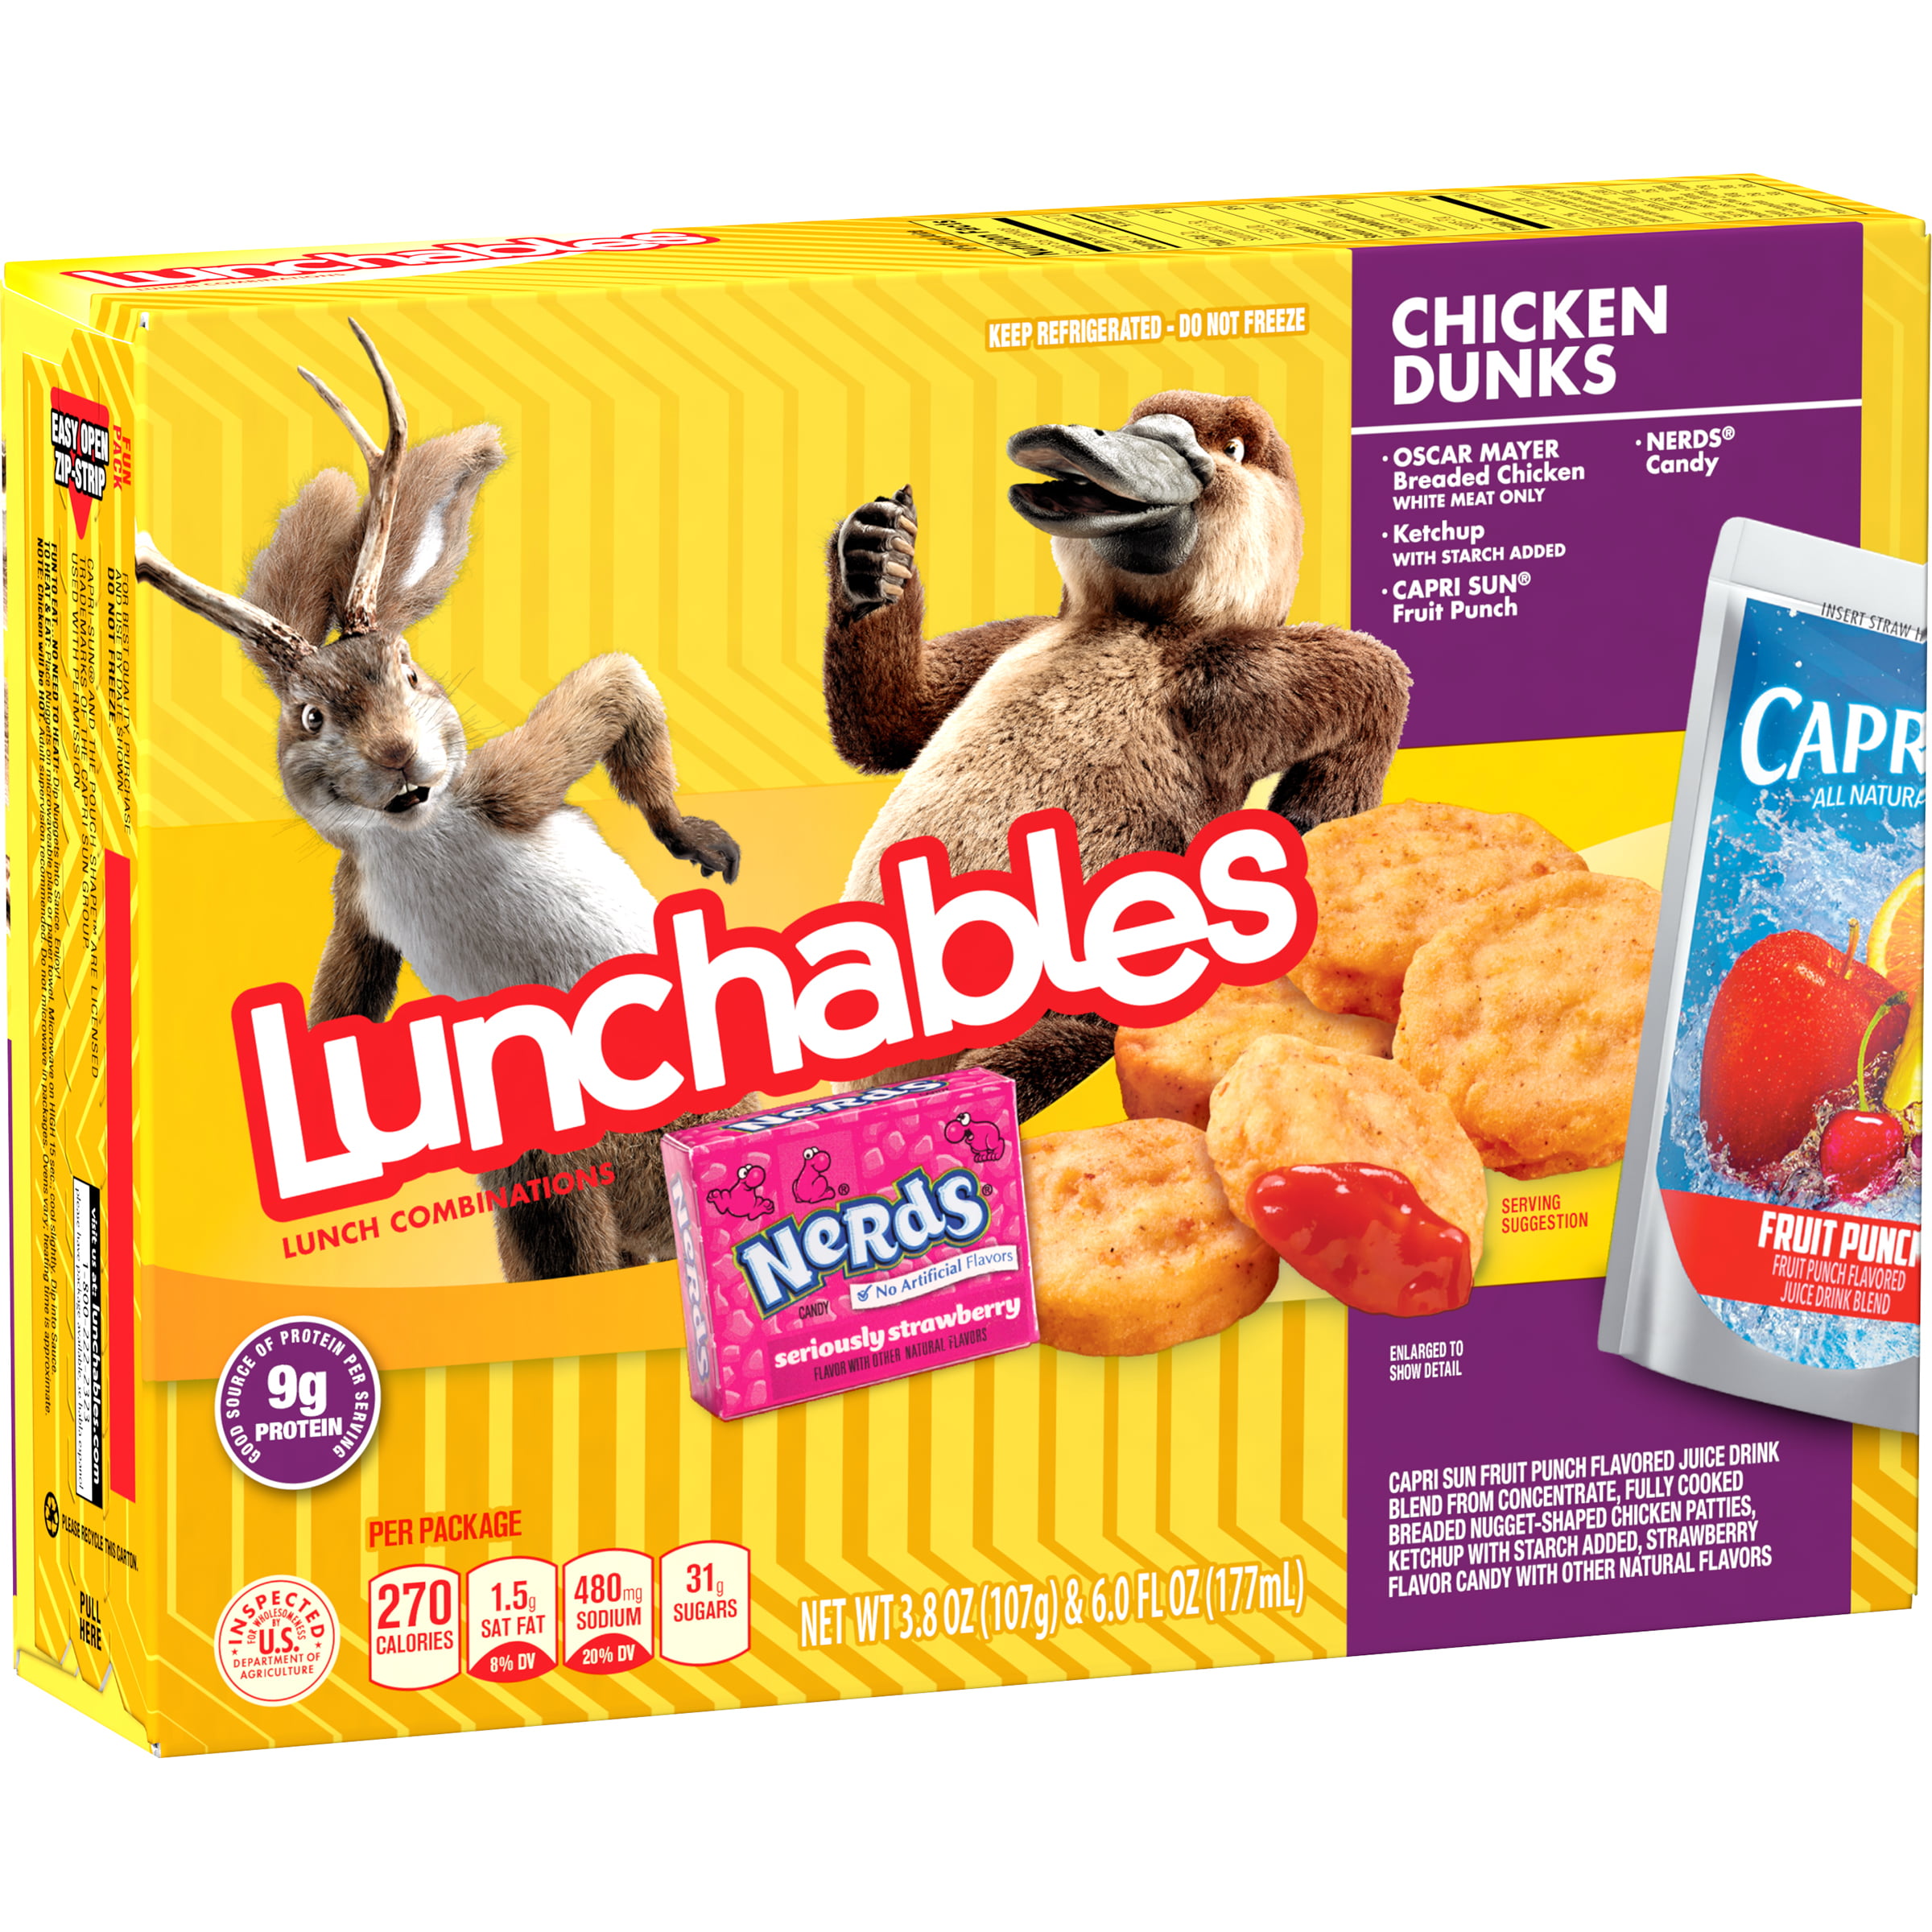 Lunchables Lunch Combinations Chicken Dunks, 9.8 oz Box